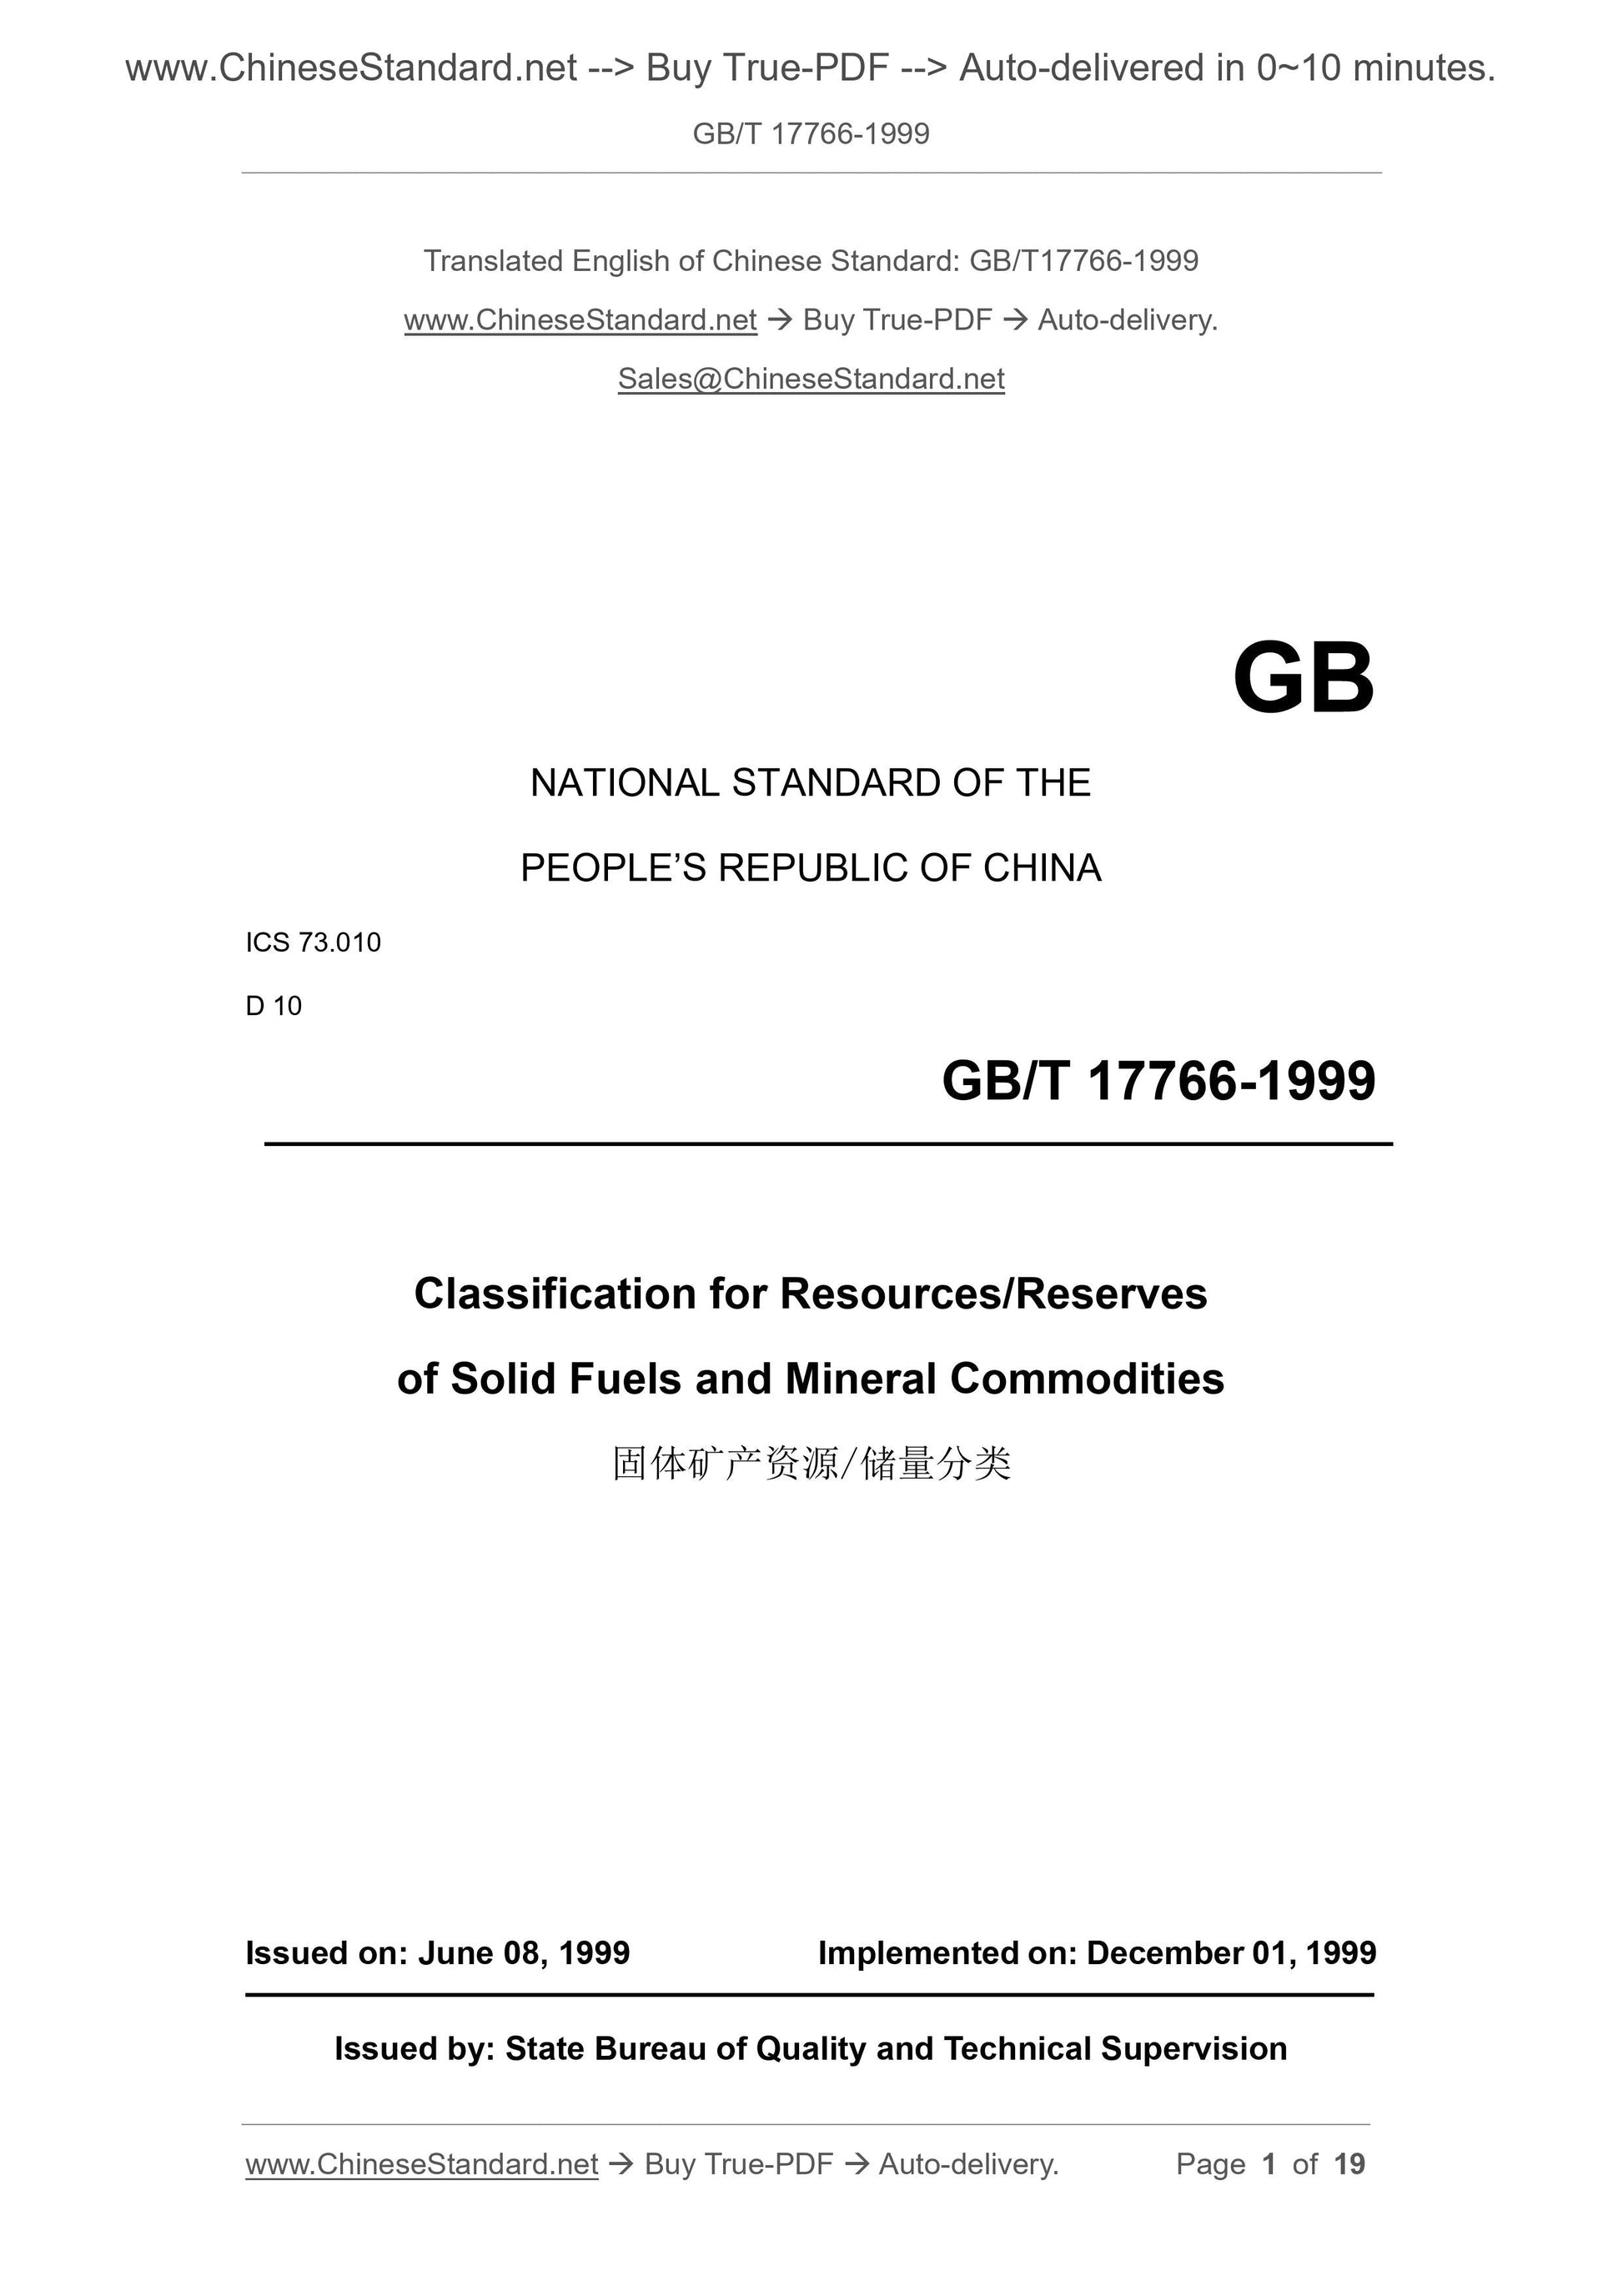 GB/T 17766-1999 Page 1